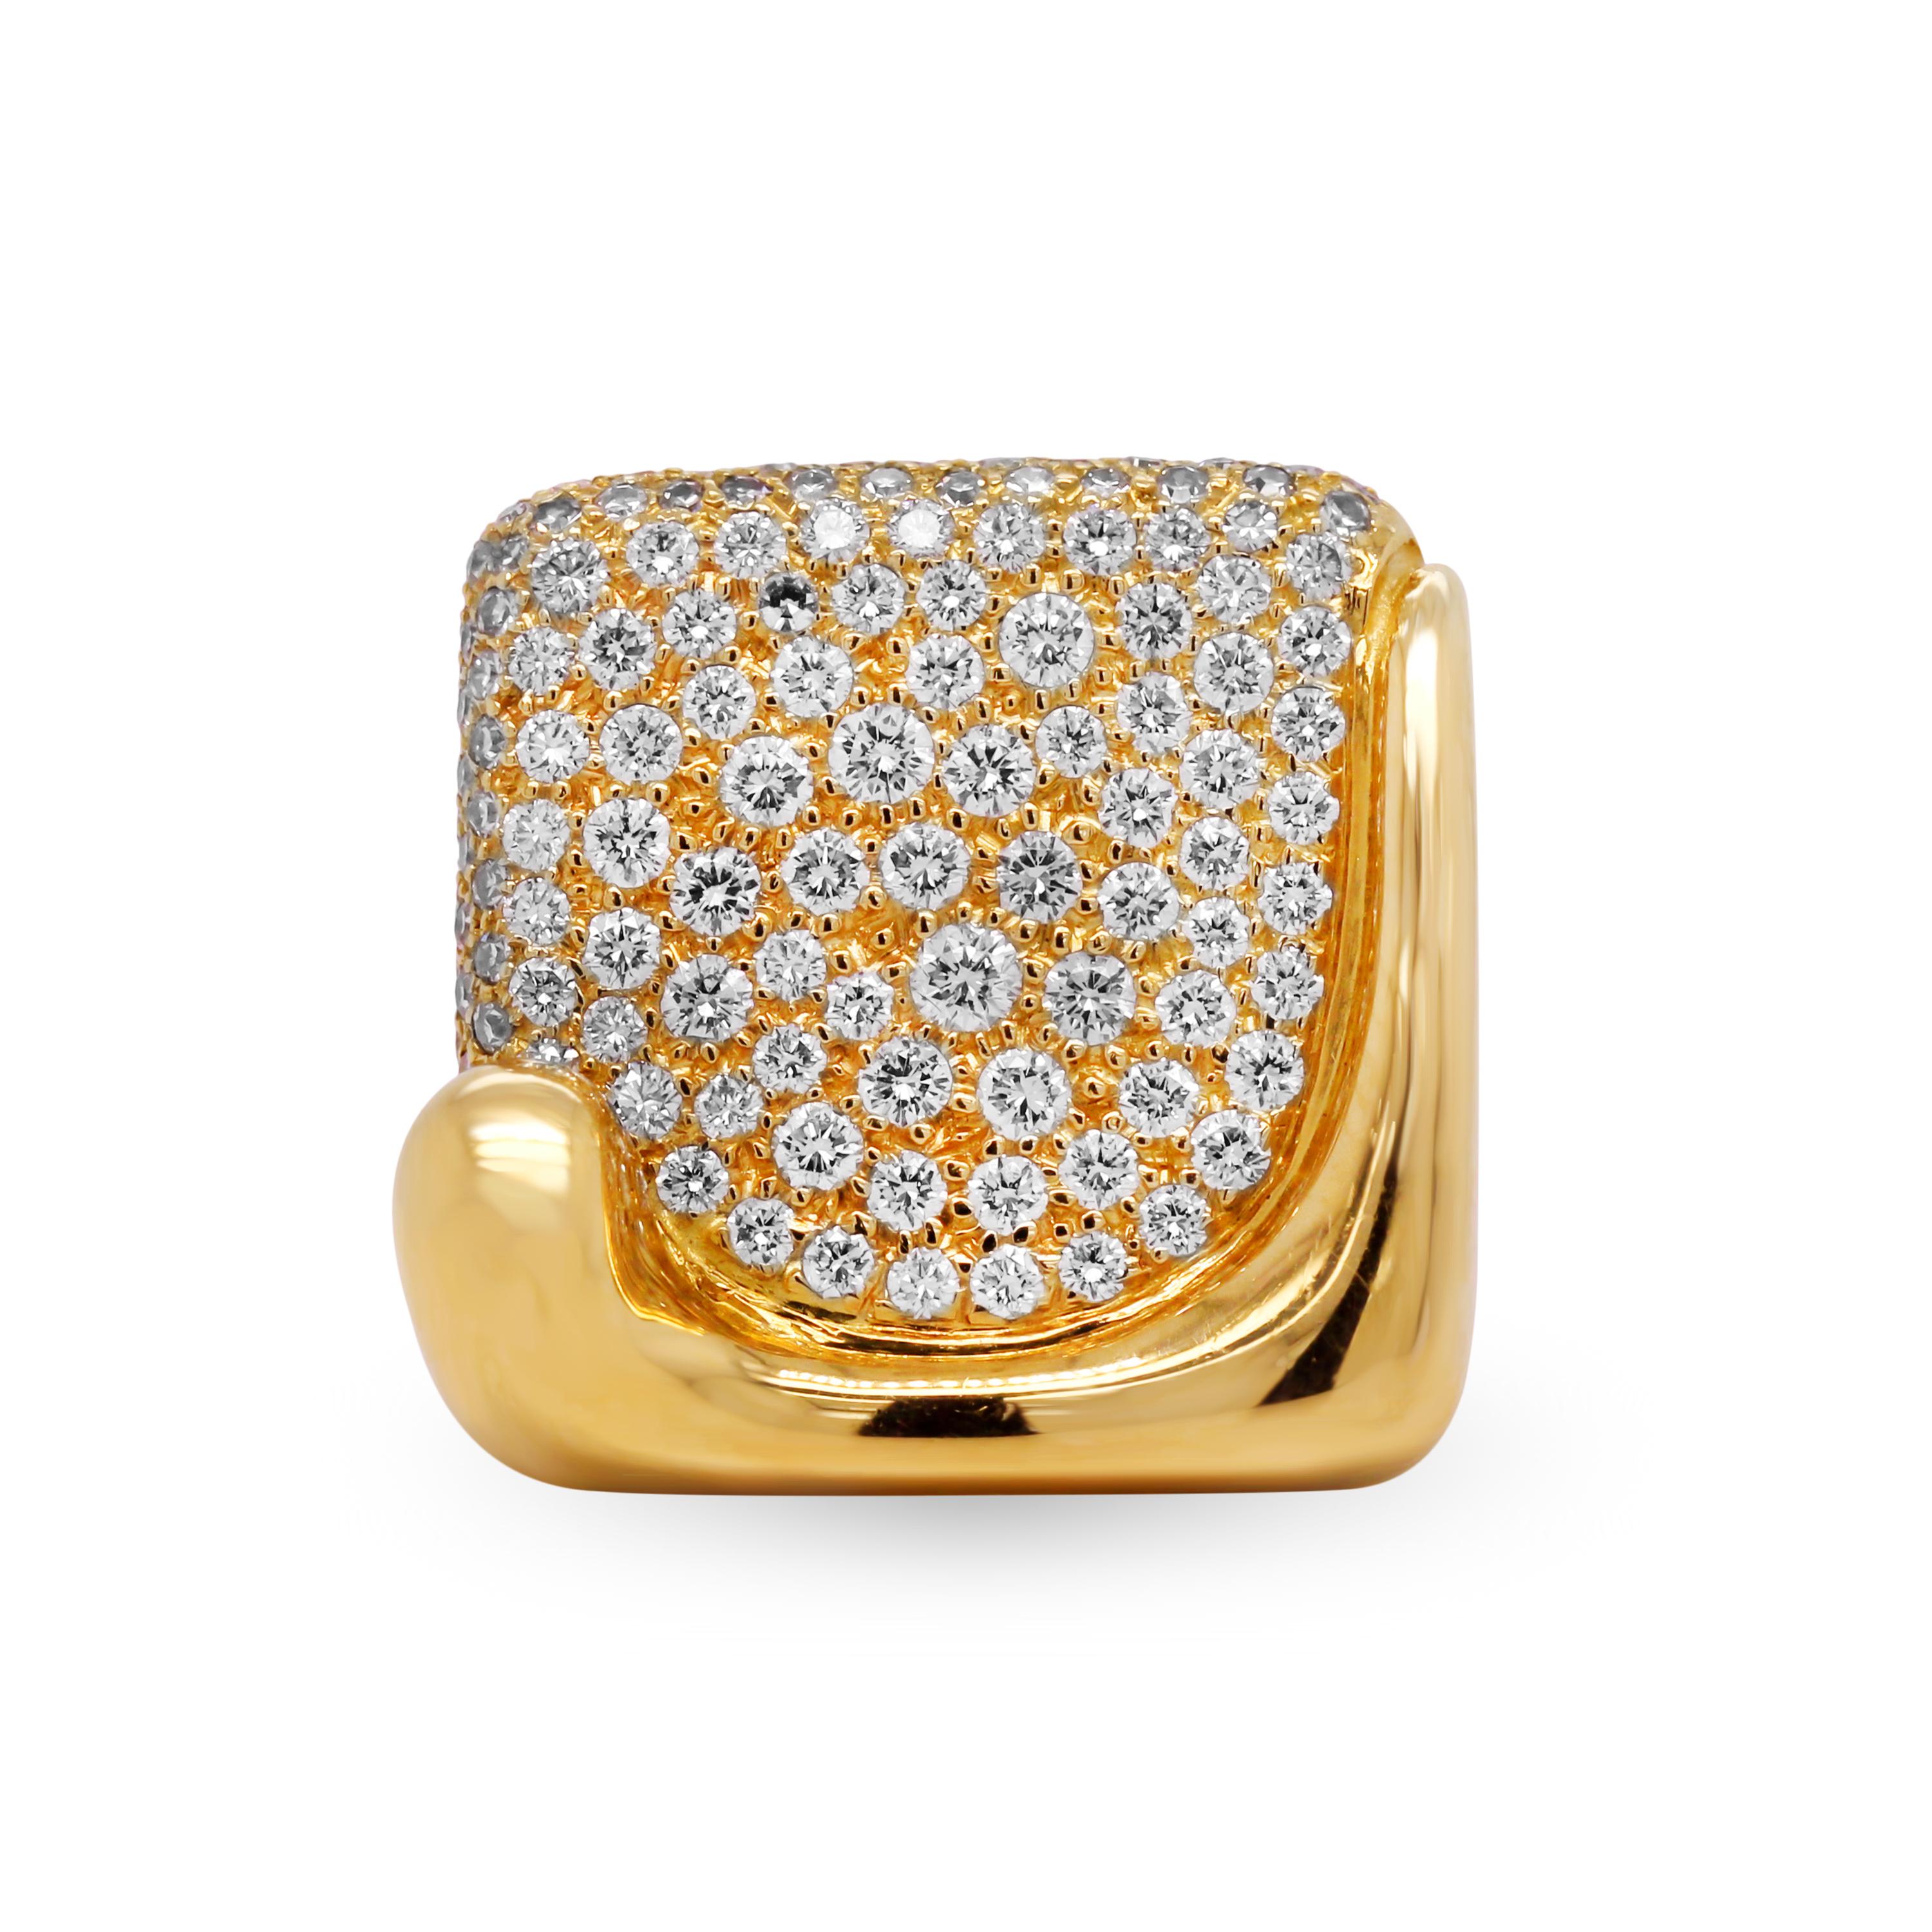 Tiffany & Co Elsa Peretti 18 Karat Gold Diamond Square Ring

This state-of-the-art ring by Tiffany & Co, Elsa Peretti is truly second to none. The square face is set with diamonds.

Apprx. 2.50 carat G-F color, VVS-VS clarity diamonds

Ring face is